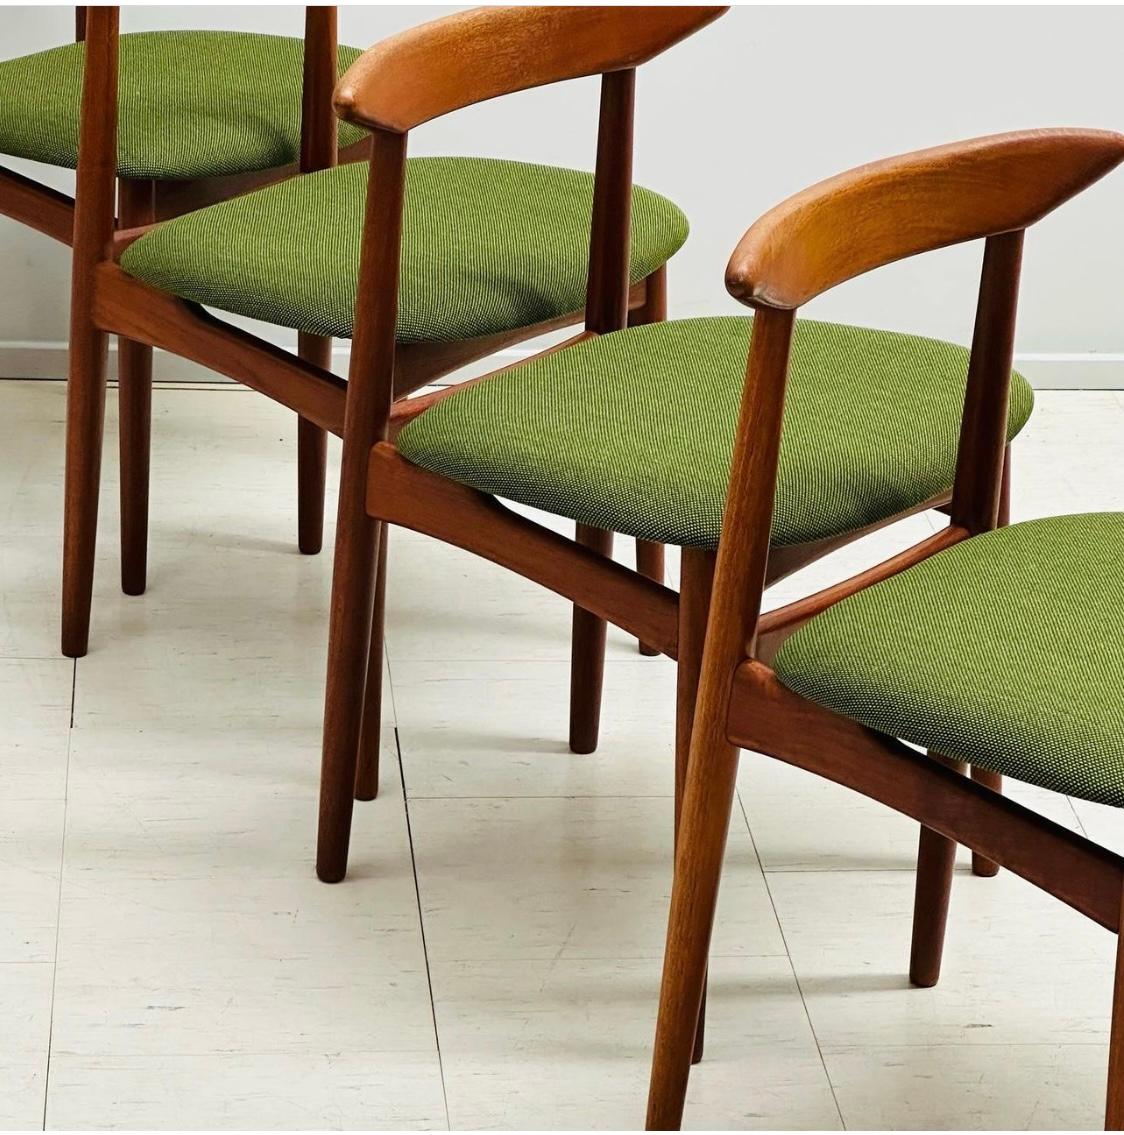 Set 4 Danish Teak Chairs by Arne Hovmand-Olsen for Mogens Kold, 1950s In Excellent Condition For Sale In Buffalo, NY